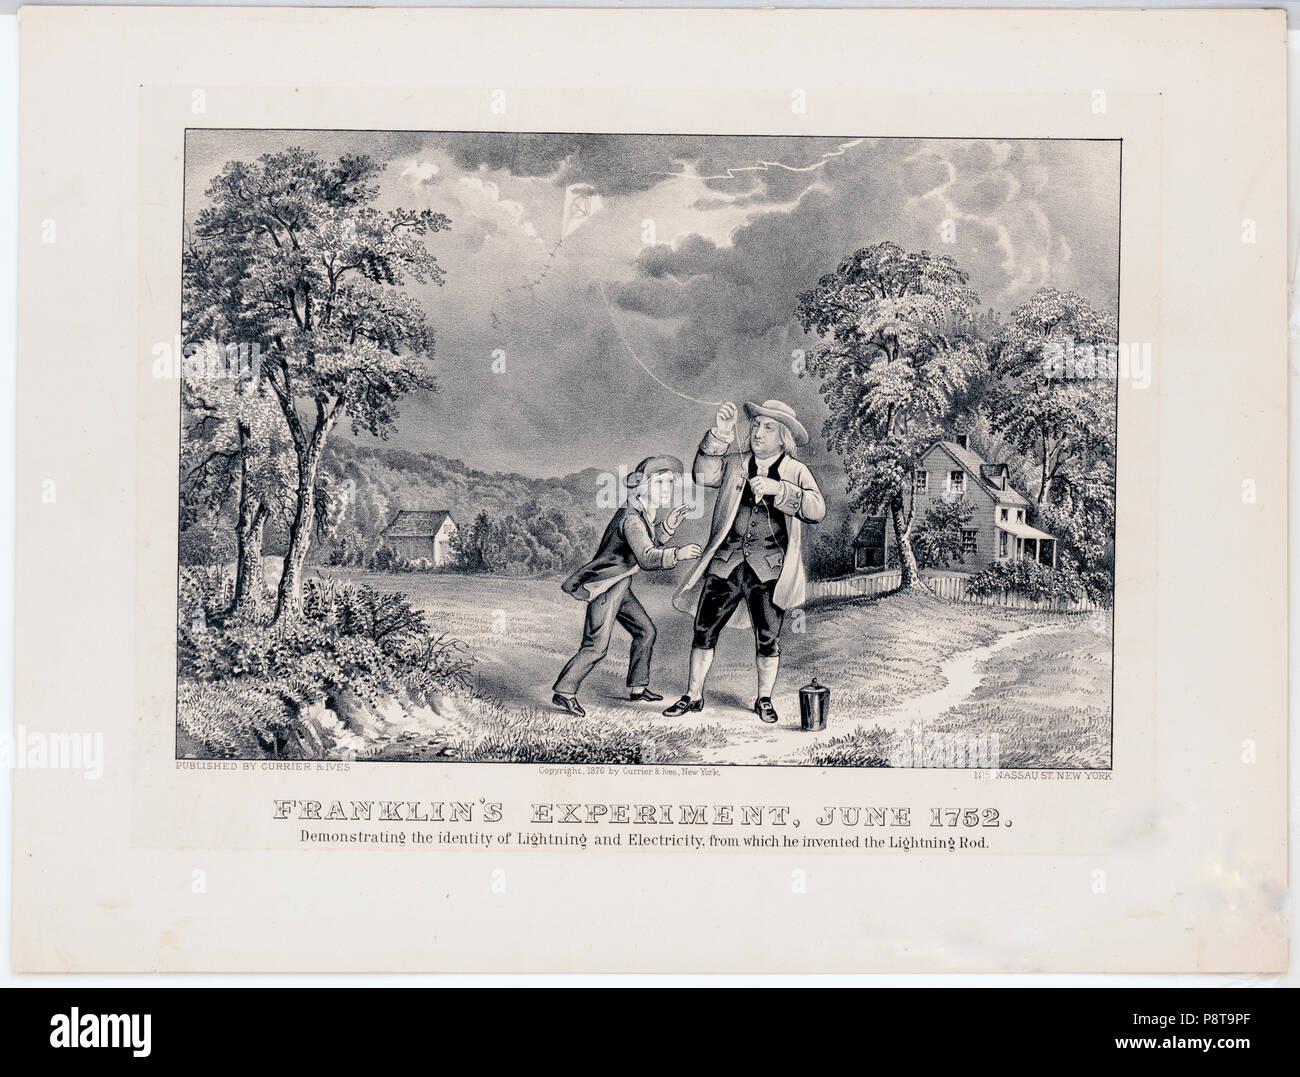 Franklin's experiment, June 1752 Demonstrating the identity of lightning and electricty, from which he invented the lightning rod Stock Photo